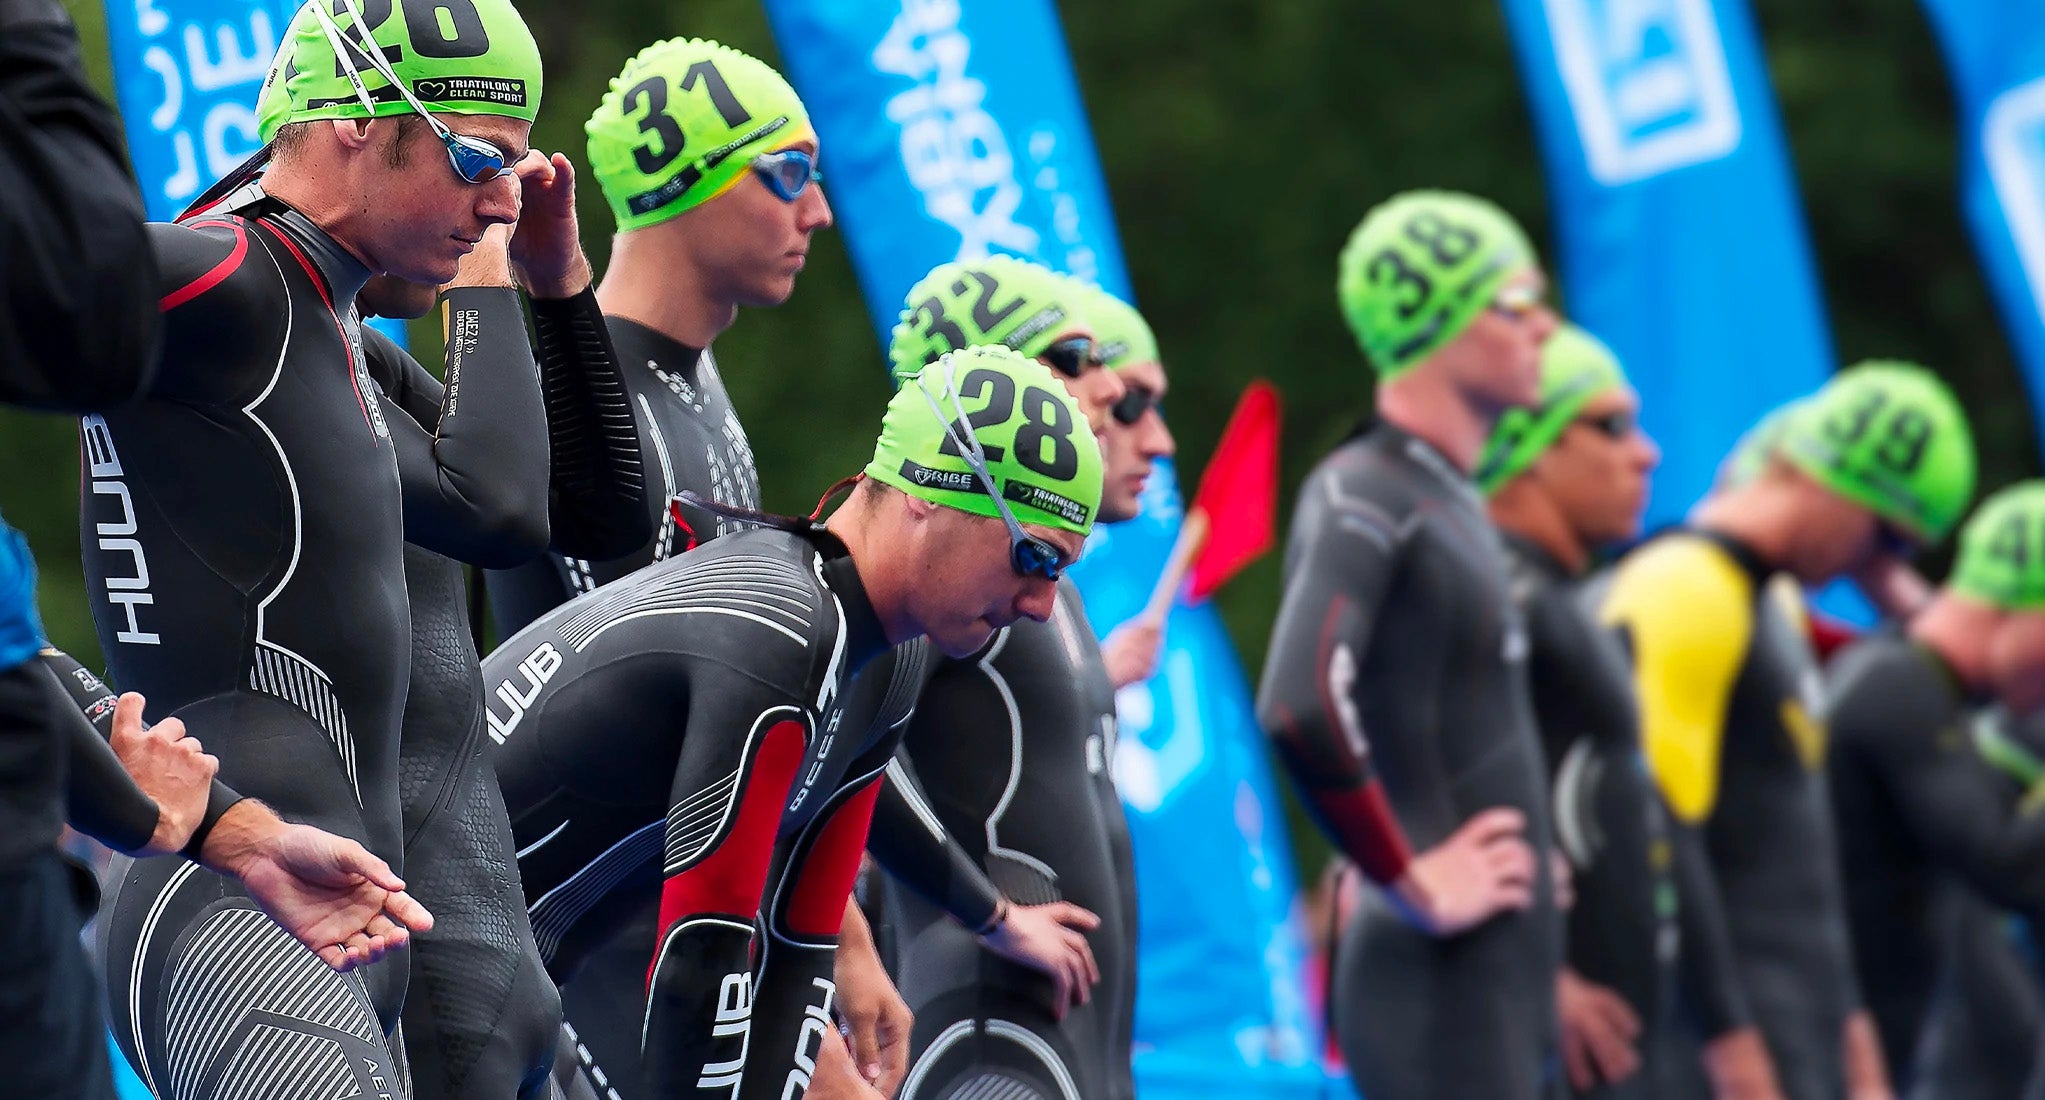 HUUB announced as British Triathlon's Official Wetsuit and Swimwear Partner